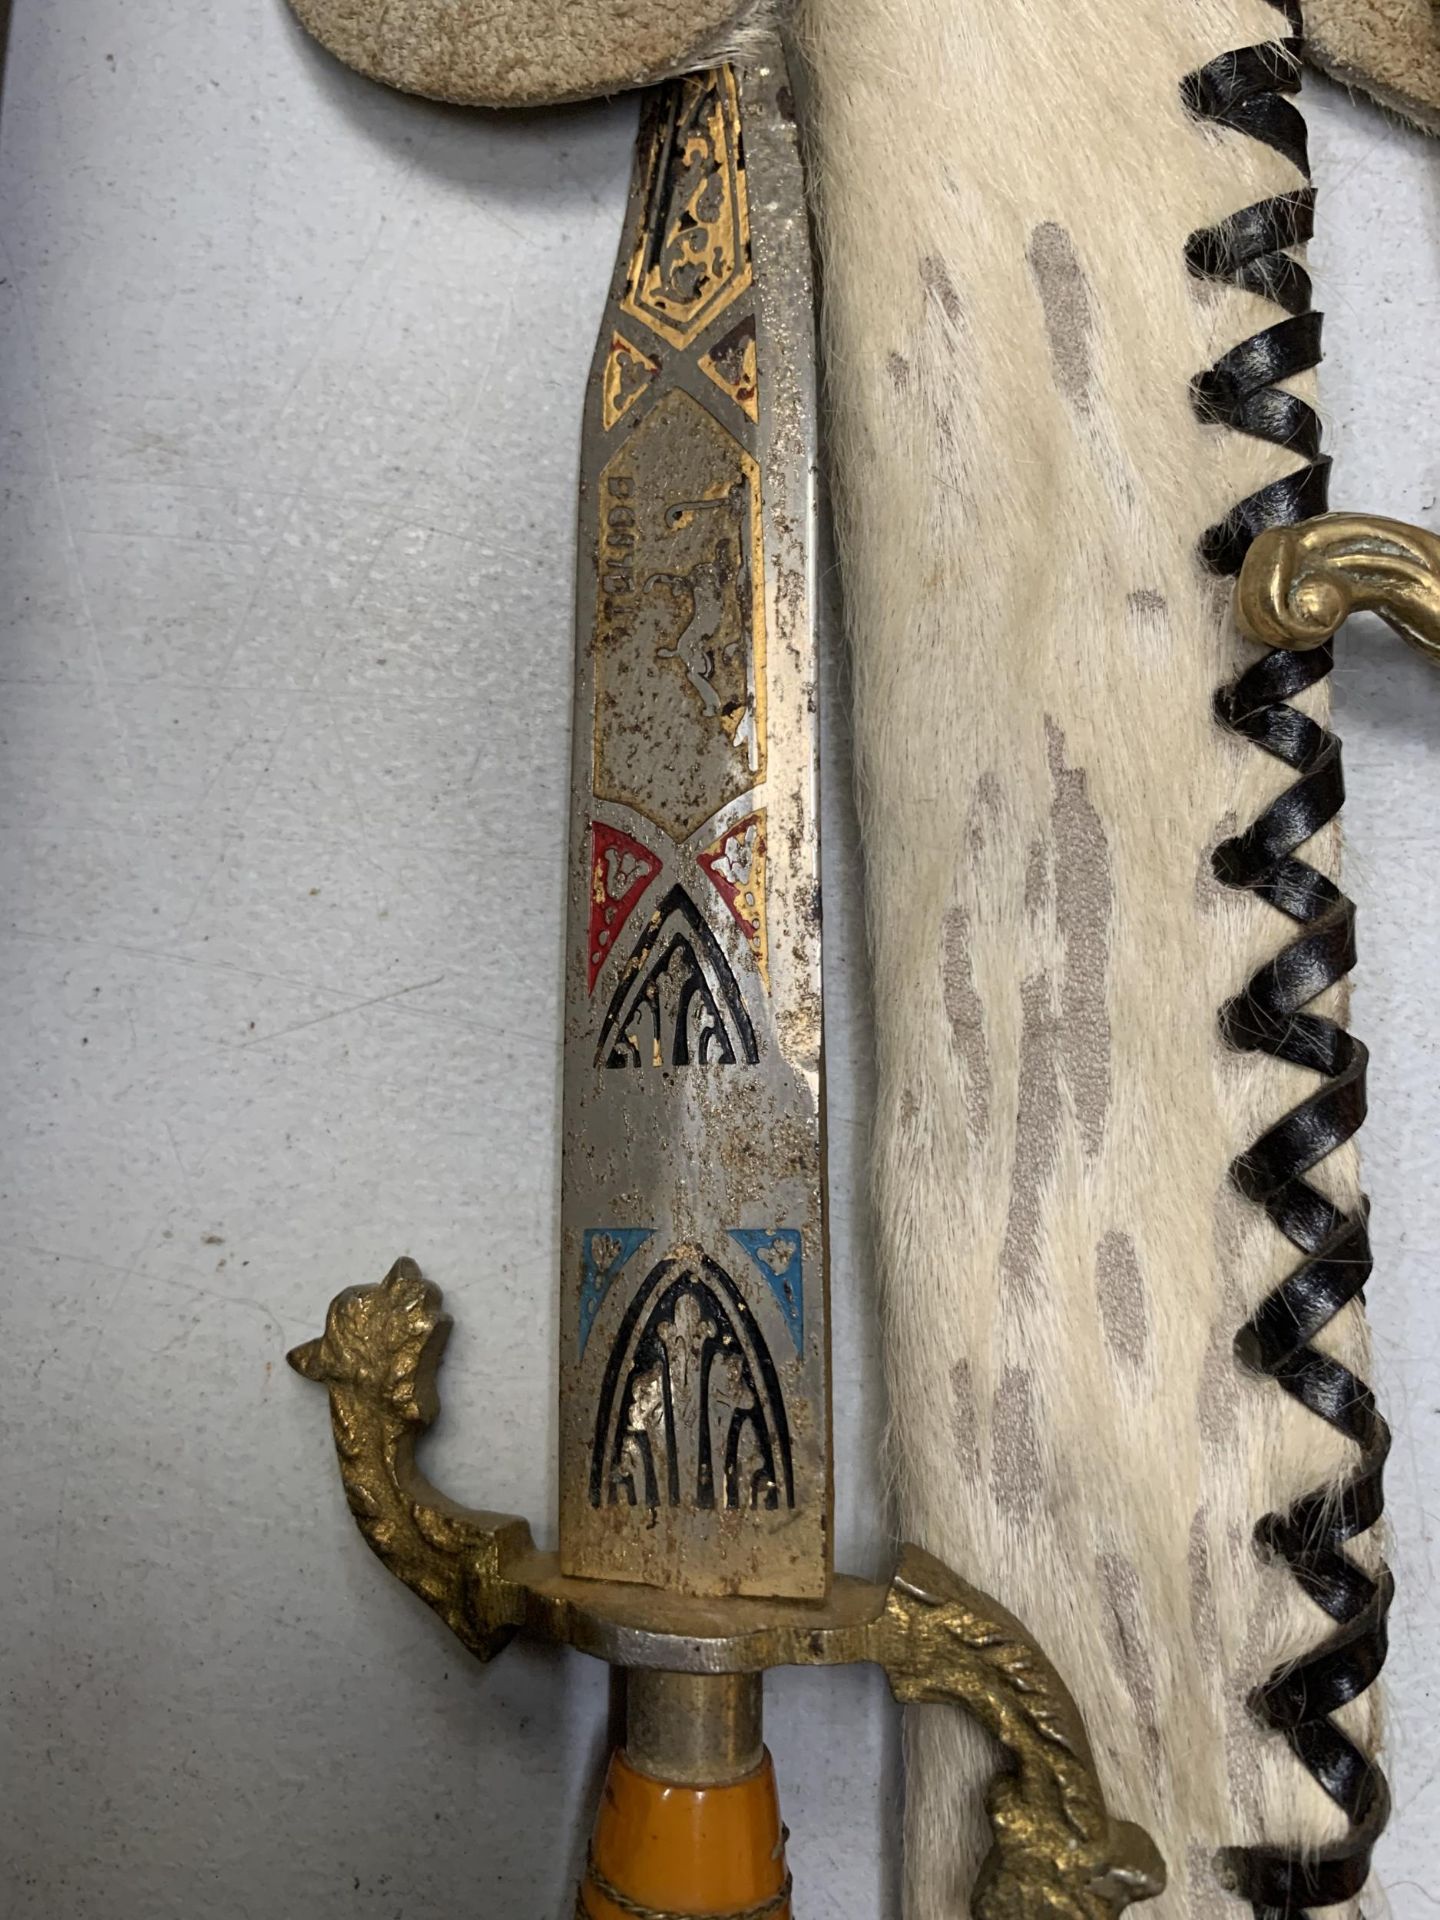 AN ORNATE KNIFE IN AN ANIMAL SKIN SHEATH AND A BRASS LETTER OPENER - Image 3 of 4